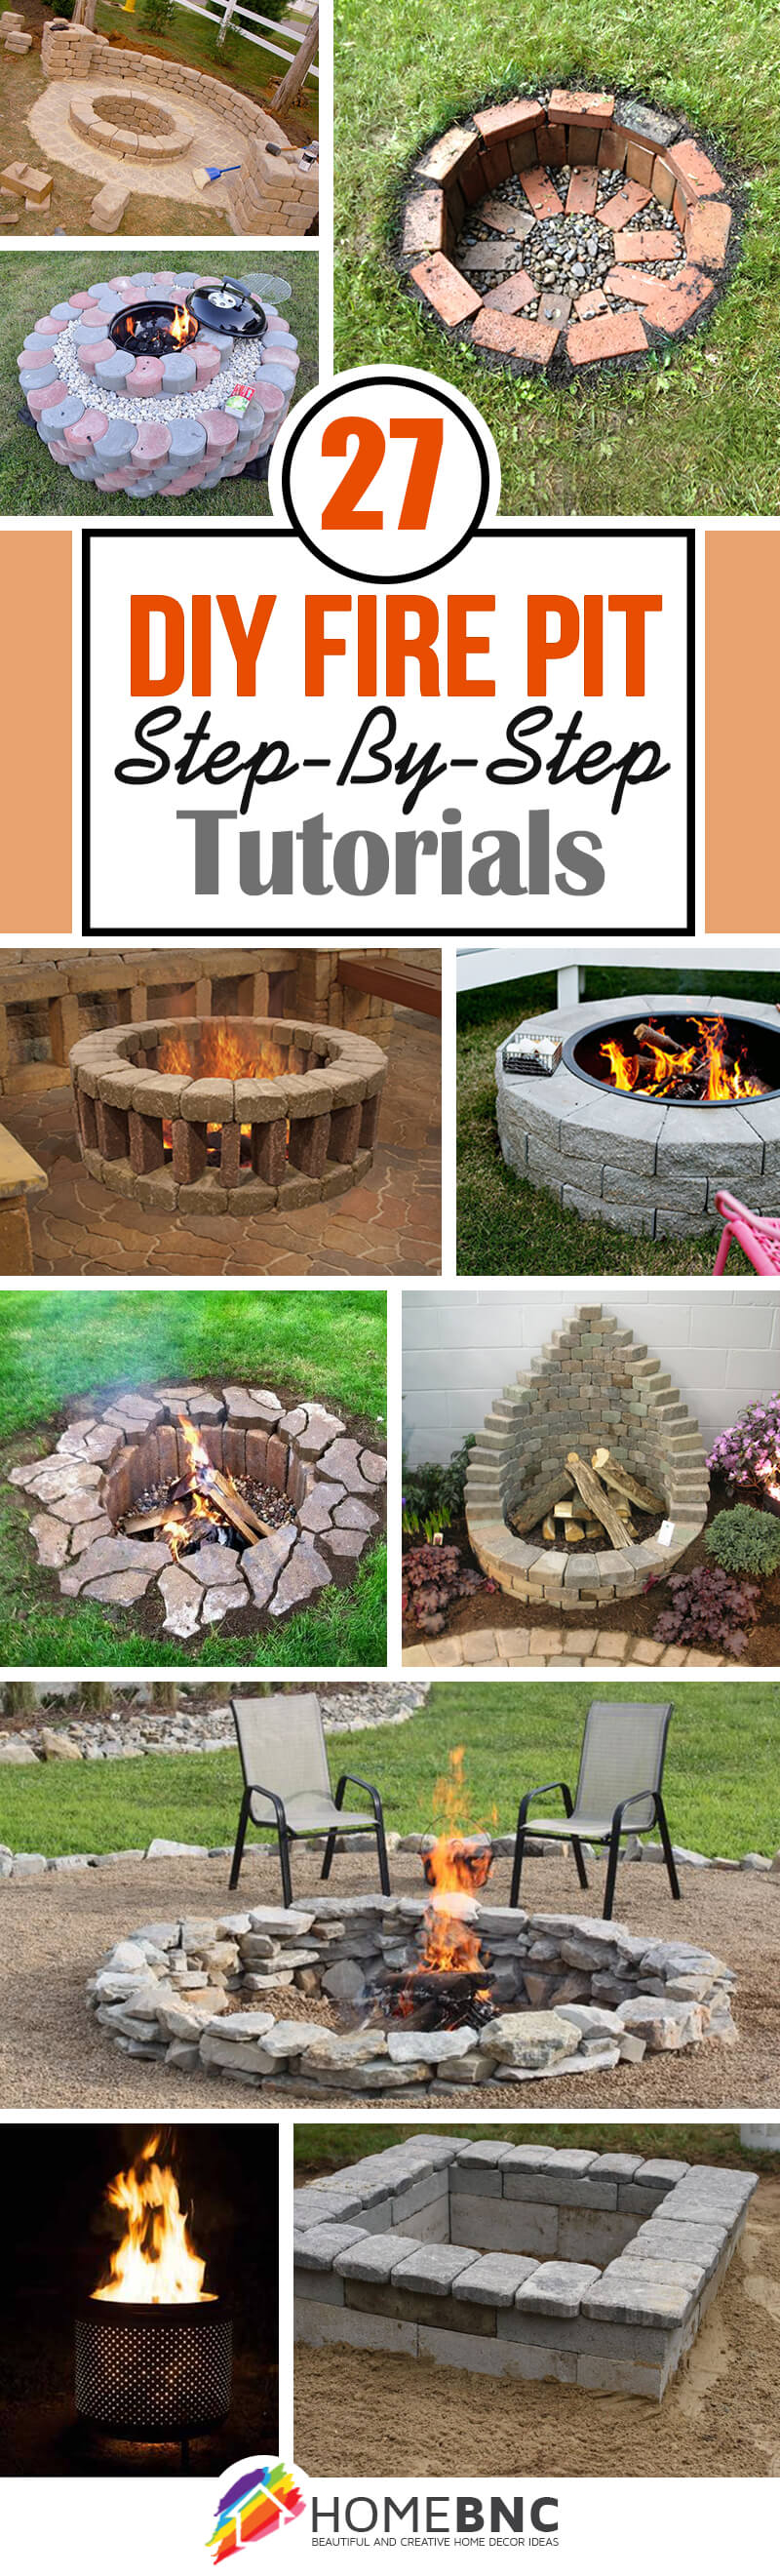 27 Best Diy Firepit Ideas And Designs, How To Make Your Own Fire Pit